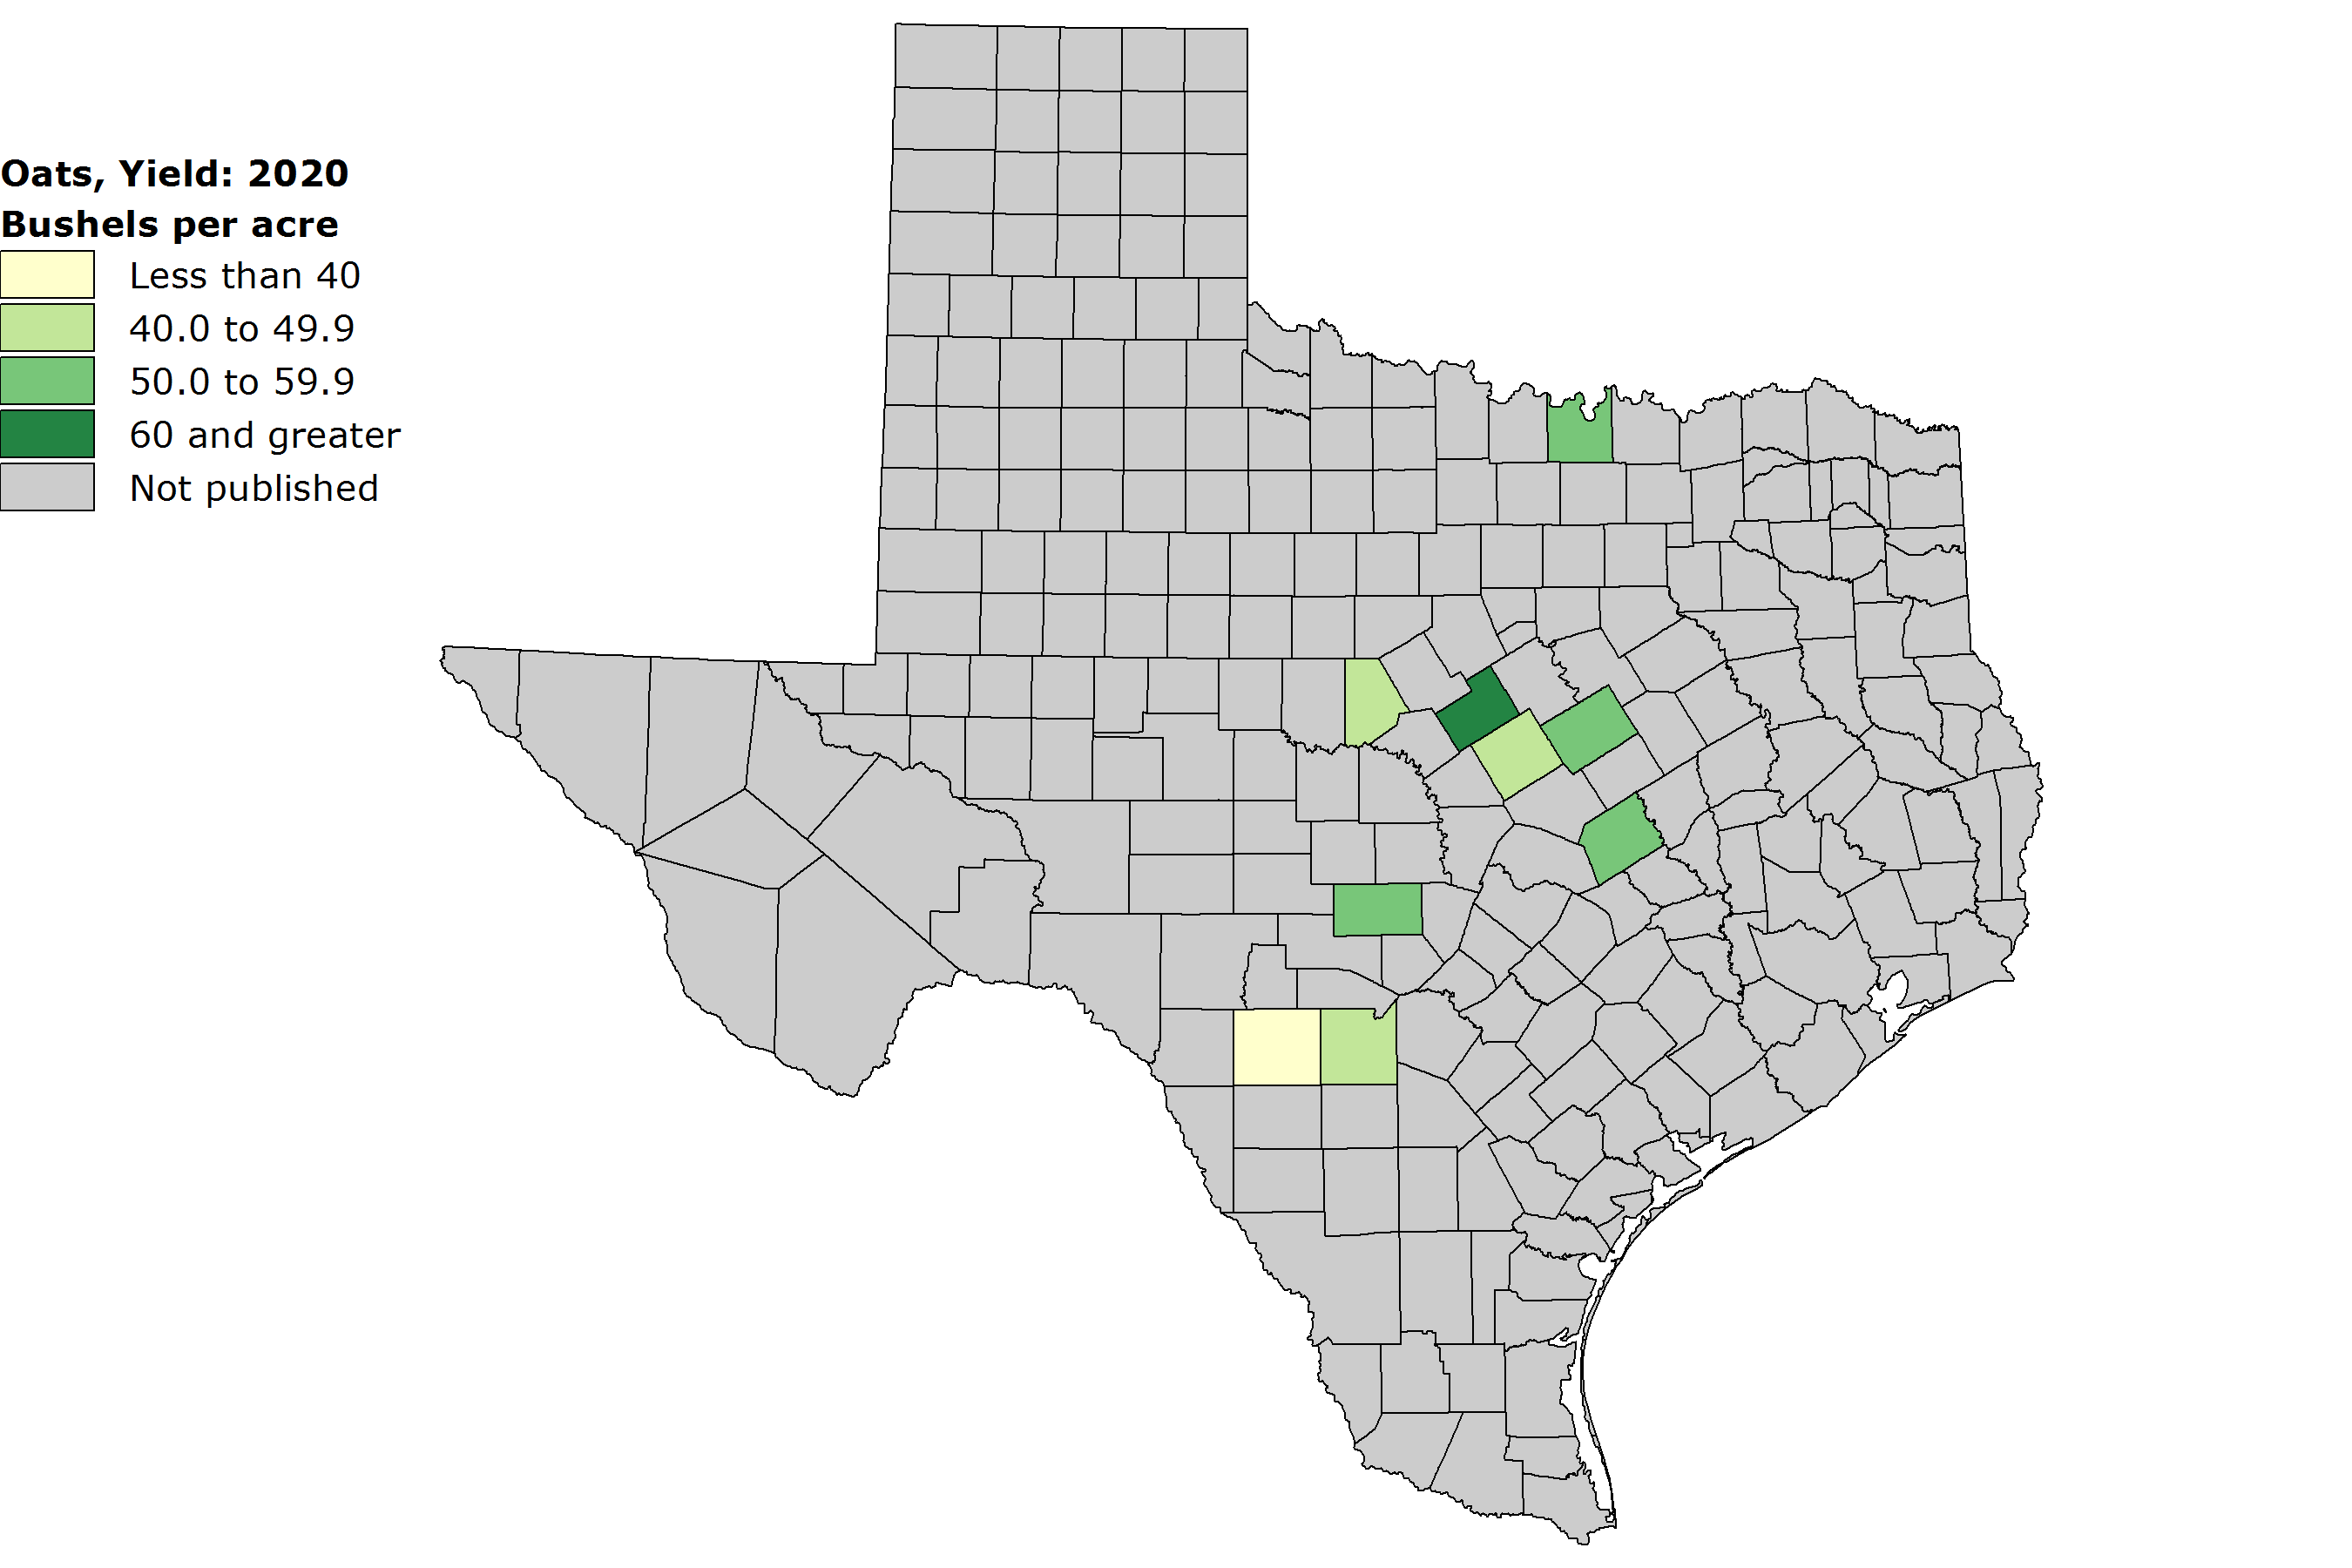 A shaded map of Texas showing the average yield of oat bushels per acre.